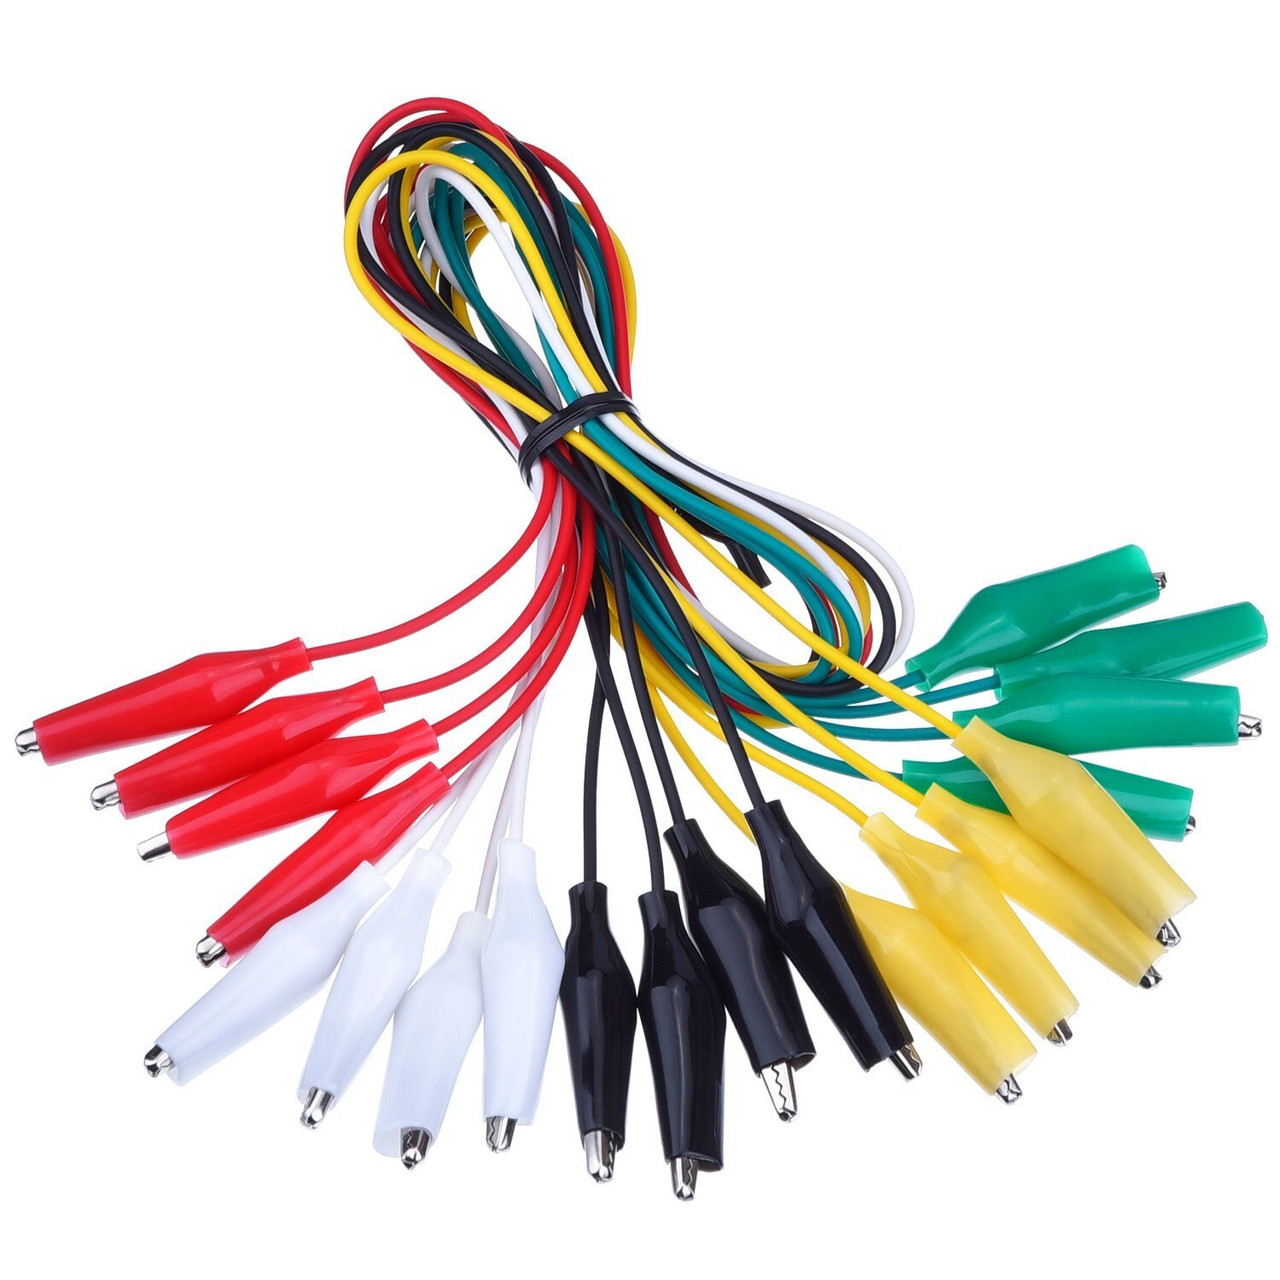 EgalBest Cleqee P1025 10pcs Alligator Clips Electrical DIY Test Leads Alligator Double-Ended Test Jumper Wire